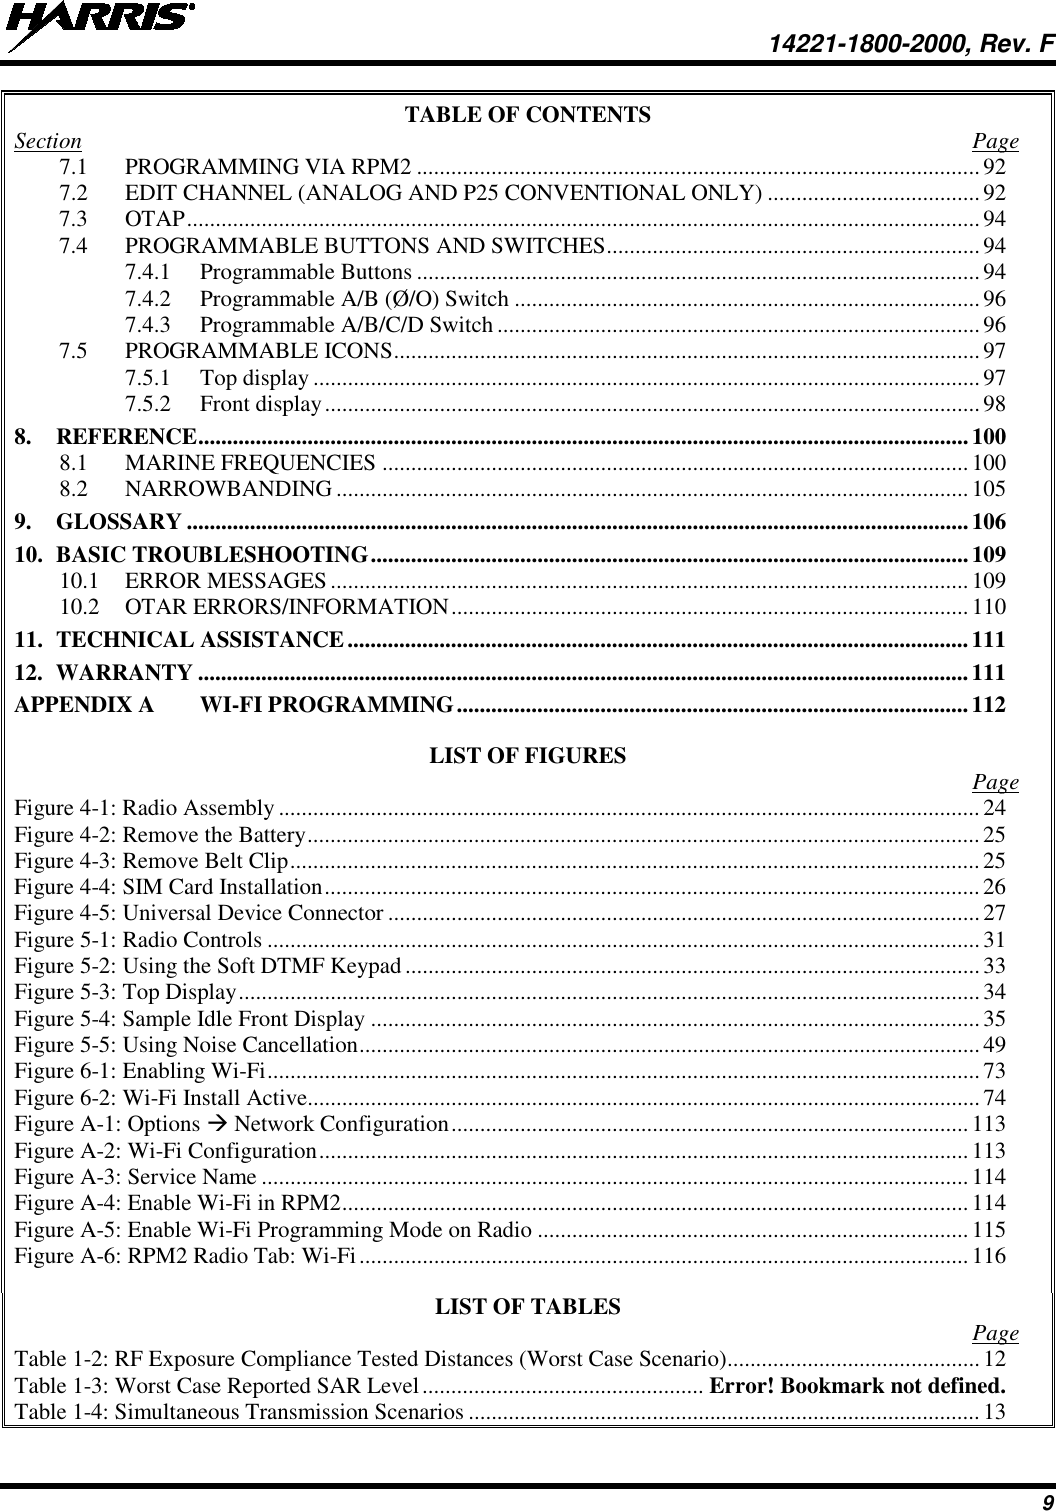  14221-1800-2000, Rev. F 9 TABLE OF CONTENTS Section  Page 7.1 PROGRAMMING VIA RPM2 .................................................................................................. 92 7.2 EDIT CHANNEL (ANALOG AND P25 CONVENTIONAL ONLY) ..................................... 92 7.3 OTAP .......................................................................................................................................... 94 7.4 PROGRAMMABLE BUTTONS AND SWITCHES ................................................................. 94 7.4.1 Programmable Buttons .................................................................................................. 94 7.4.2 Programmable A/B (Ø/O) Switch ................................................................................. 96 7.4.3 Programmable A/B/C/D Switch .................................................................................... 96 7.5 PROGRAMMABLE ICONS ...................................................................................................... 97 7.5.1 Top display .................................................................................................................... 97 7.5.2 Front display .................................................................................................................. 98 8. REFERENCE ...................................................................................................................................... 100 8.1 MARINE FREQUENCIES ...................................................................................................... 100 8.2 NARROWBANDING .............................................................................................................. 105 9. GLOSSARY ........................................................................................................................................ 106 10. BASIC TROUBLESHOOTING ........................................................................................................ 109 10.1 ERROR MESSAGES ............................................................................................................... 109 10.2 OTAR ERRORS/INFORMATION .......................................................................................... 110 11. TECHNICAL ASSISTANCE ............................................................................................................ 111 12. WARRANTY ...................................................................................................................................... 111 APPENDIX A WI-FI PROGRAMMING ......................................................................................... 112  LIST OF FIGURES   Page Figure 4-1: Radio Assembly .......................................................................................................................... 24 Figure 4-2: Remove the Battery ..................................................................................................................... 25 Figure 4-3: Remove Belt Clip ........................................................................................................................ 25 Figure 4-4: SIM Card Installation .................................................................................................................. 26 Figure 4-5: Universal Device Connector ....................................................................................................... 27 Figure 5-1: Radio Controls ............................................................................................................................ 31 Figure 5-2: Using the Soft DTMF Keypad .................................................................................................... 33 Figure 5-3: Top Display ................................................................................................................................. 34 Figure 5-4: Sample Idle Front Display .......................................................................................................... 35 Figure 5-5: Using Noise Cancellation ............................................................................................................ 49 Figure 6-1: Enabling Wi-Fi ............................................................................................................................ 73 Figure 6-2: Wi-Fi Install Active ..................................................................................................................... 74 Figure A-1: Options  Network Configuration .......................................................................................... 113 Figure A-2: Wi-Fi Configuration ................................................................................................................. 113 Figure A-3: Service Name ........................................................................................................................... 114 Figure A-4: Enable Wi-Fi in RPM2 ............................................................................................................. 114 Figure A-5: Enable Wi-Fi Programming Mode on Radio ........................................................................... 115 Figure A-6: RPM2 Radio Tab: Wi-Fi .......................................................................................................... 116  LIST OF TABLES   Page Table 1-2: RF Exposure Compliance Tested Distances (Worst Case Scenario) ............................................ 12 Table 1-3: Worst Case Reported SAR Level ................................................. Error! Bookmark not defined. Table 1-4: Simultaneous Transmission Scenarios ......................................................................................... 13 